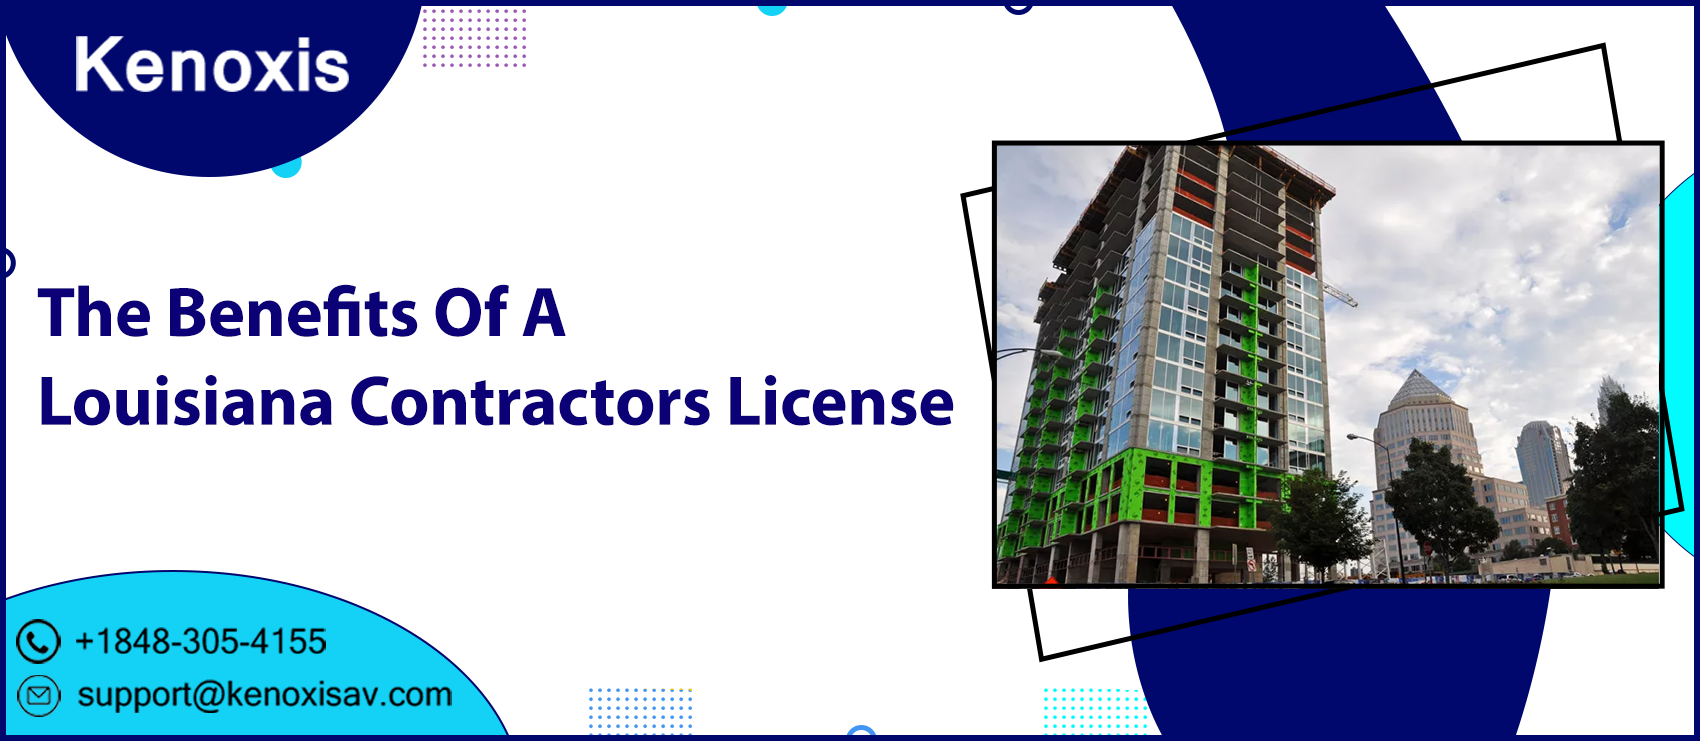 The Benefits Of A Louisiana Contractors License: What You Need To Know